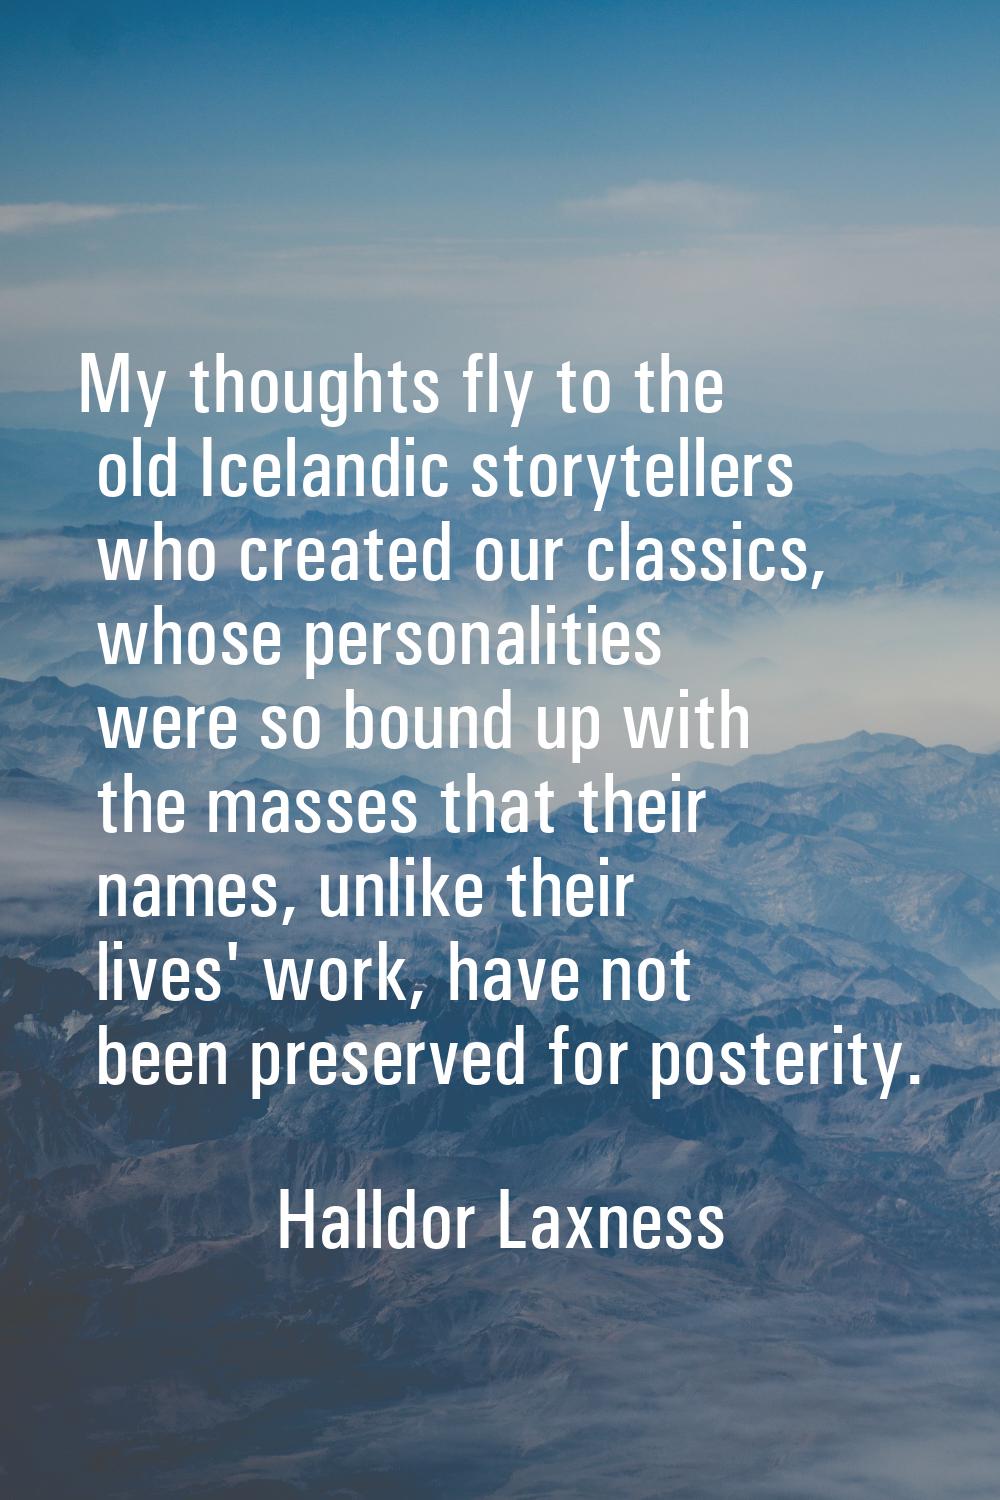 My thoughts fly to the old Icelandic storytellers who created our classics, whose personalities wer